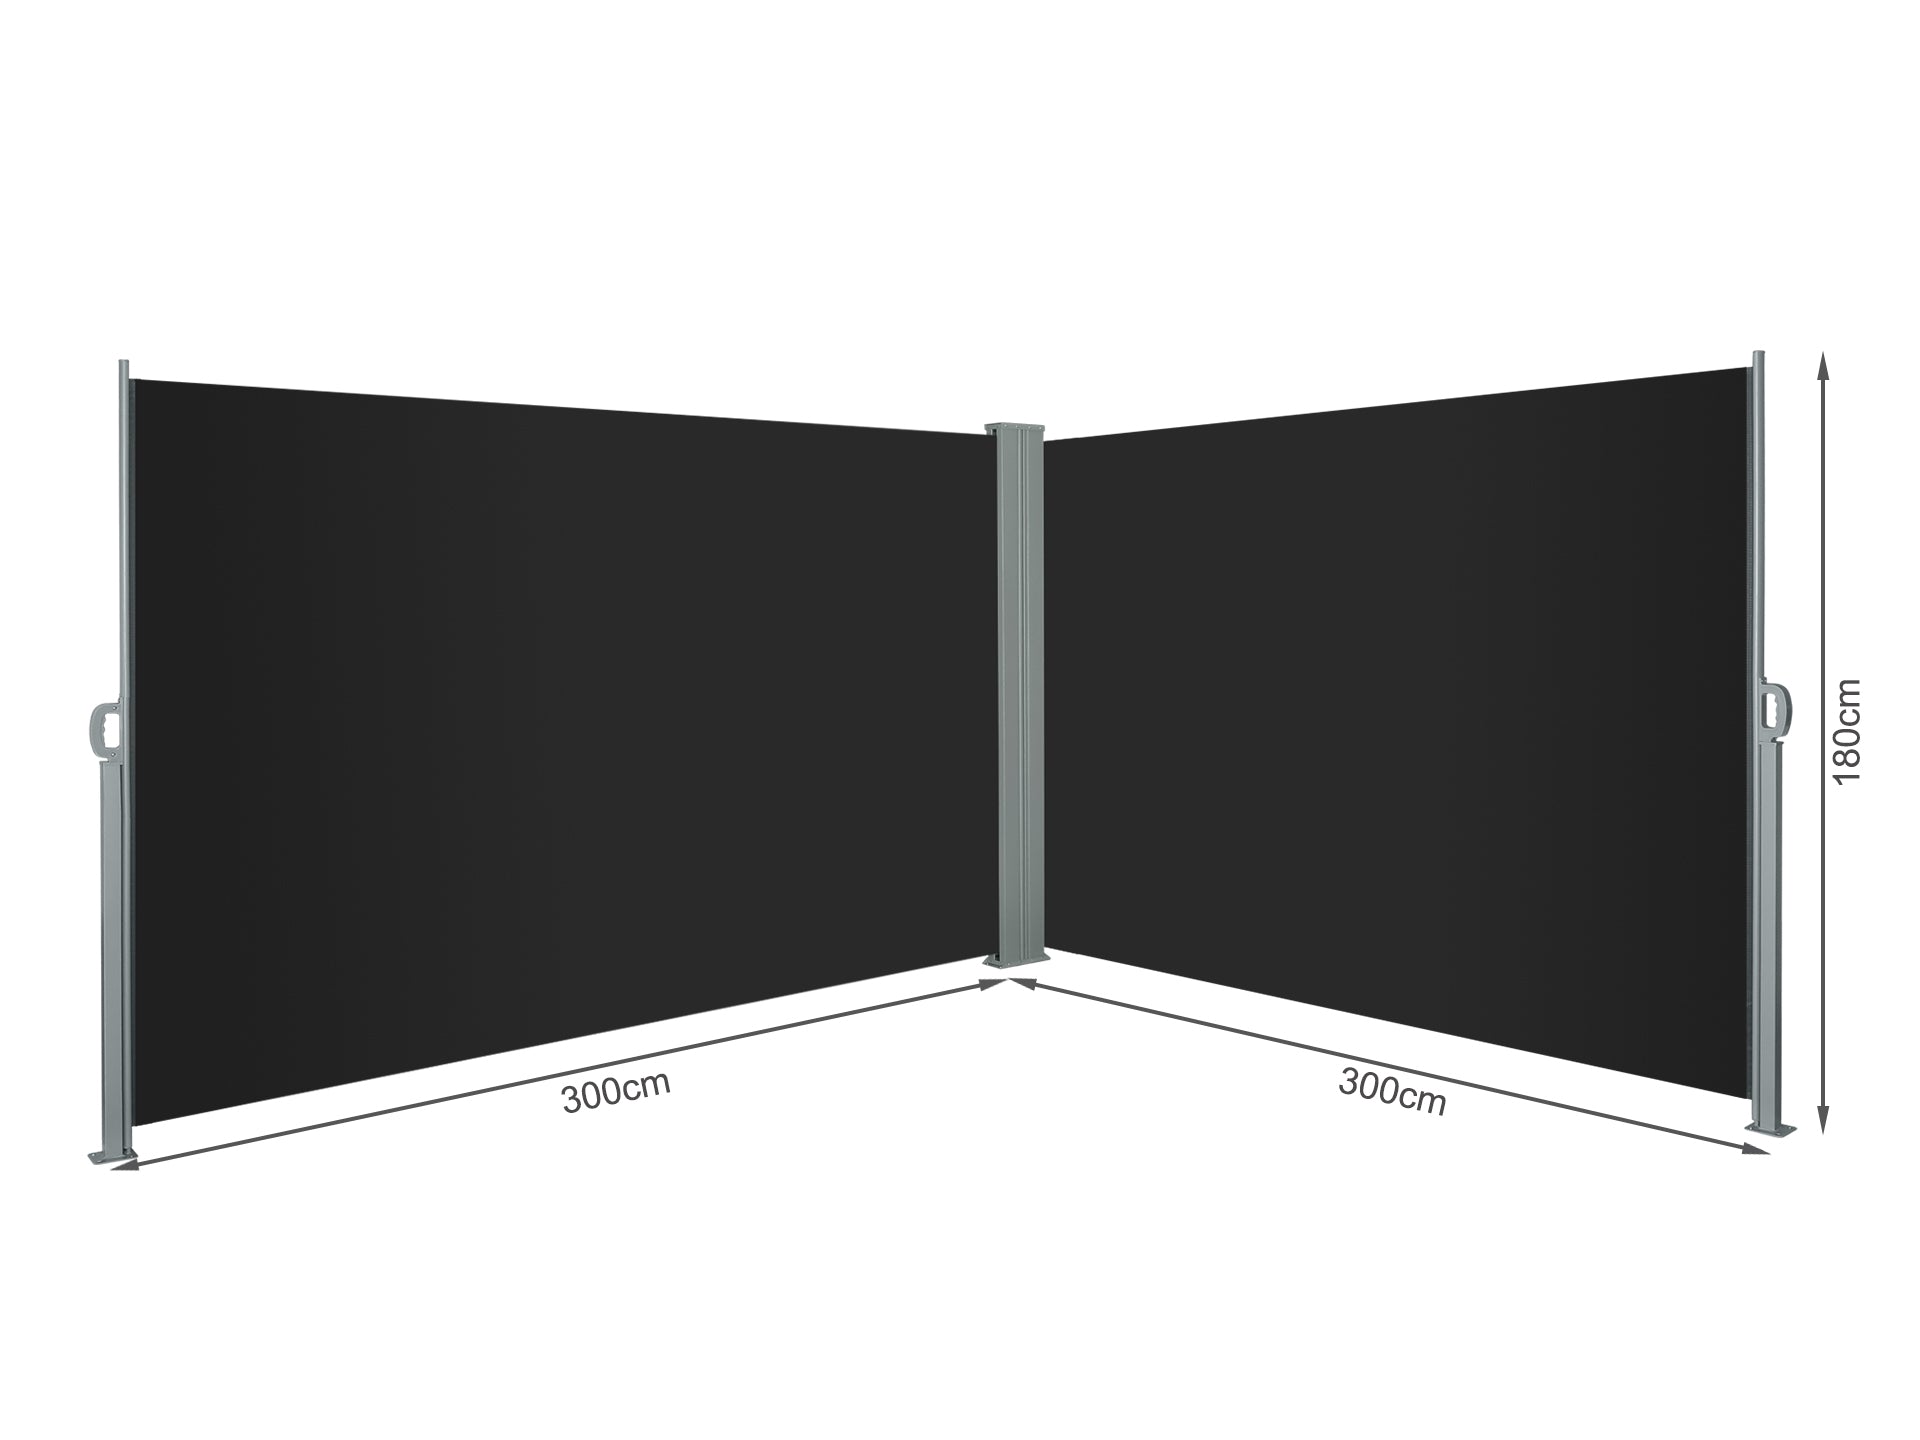 TOUGHOUT 1.8m x 3m Double Retractable Side Awning Screen Shade